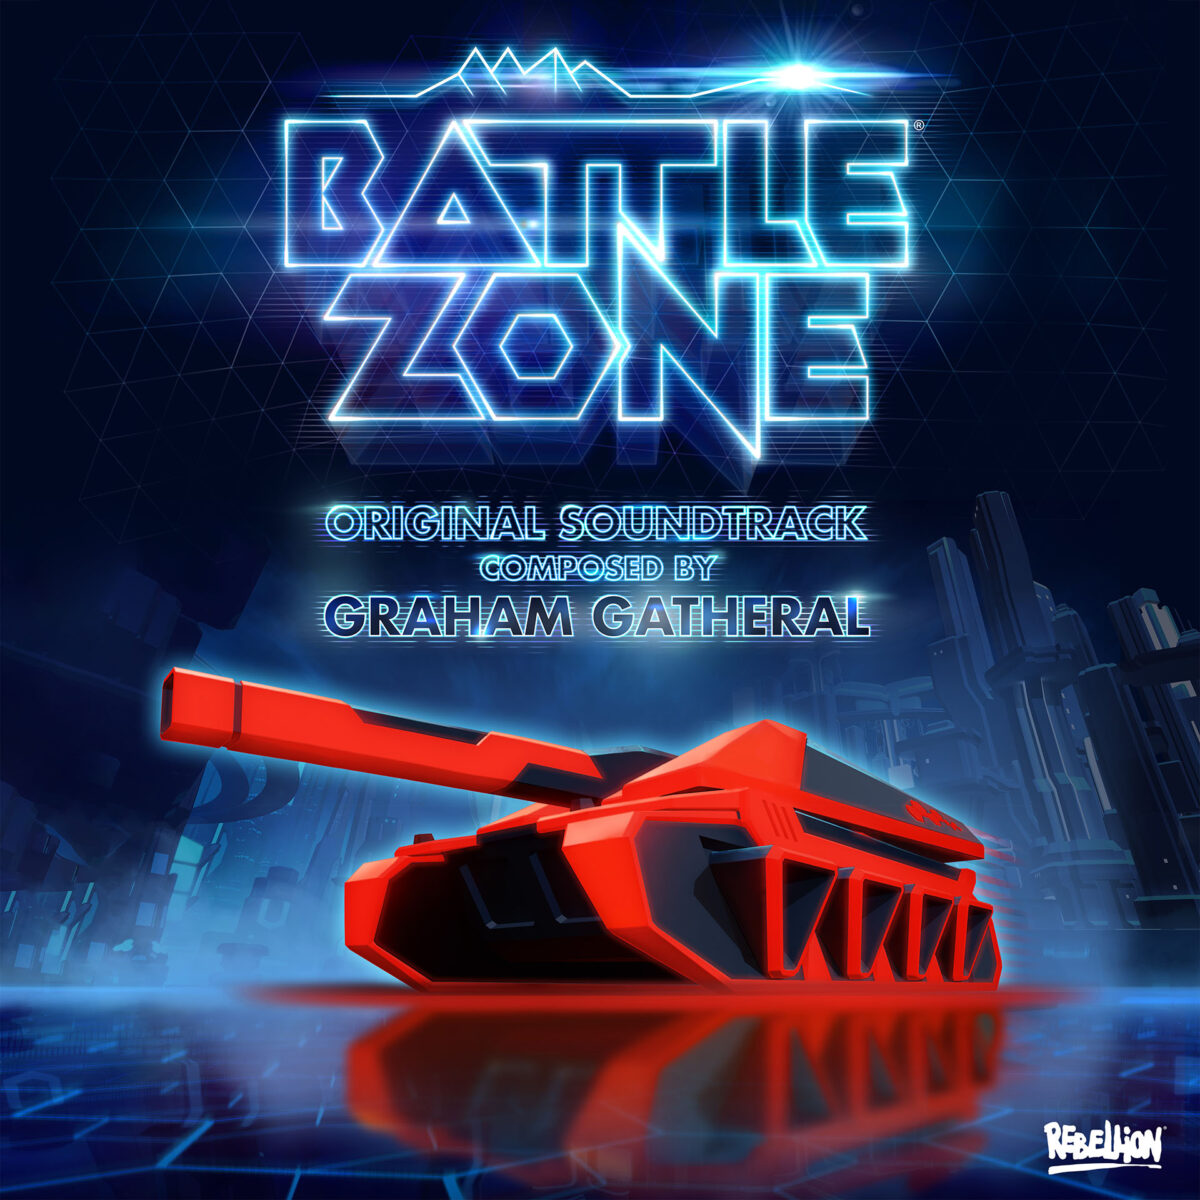 Rebellion Music launches with the soundtrack to Battlezone!